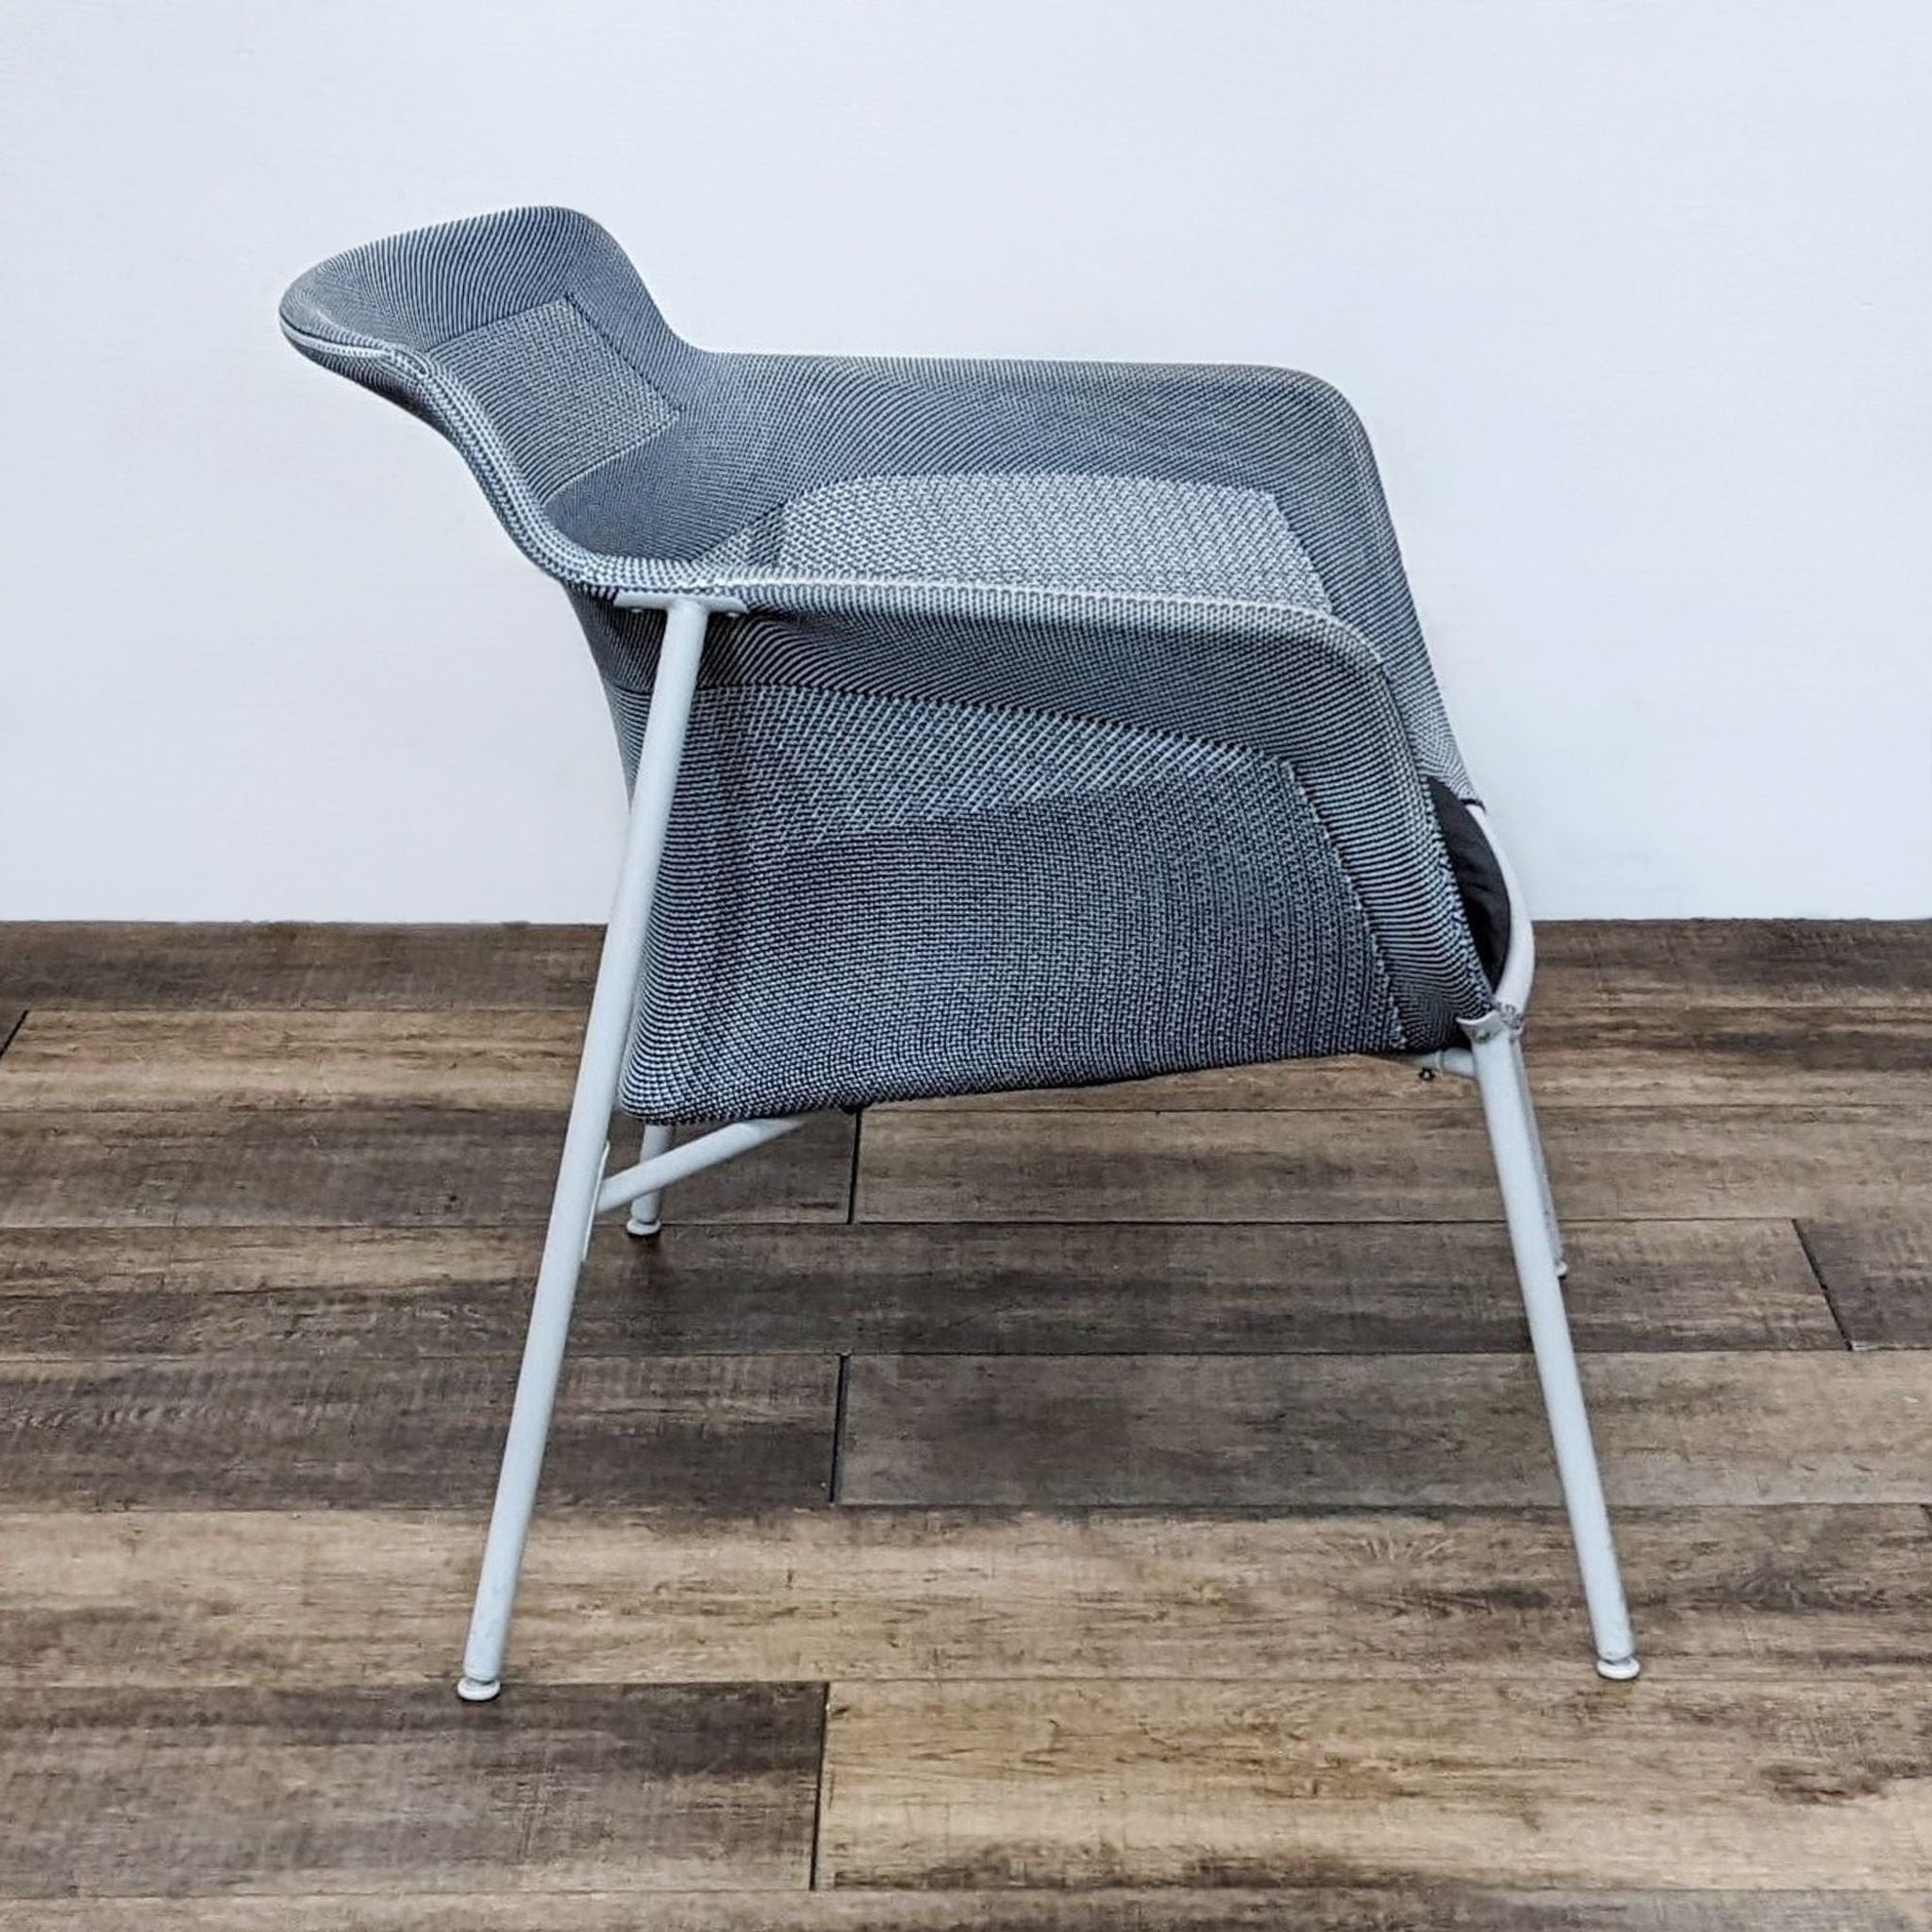 2. Side view of the IKEA PS 2017 lounge chair showcasing its ergonomic design with 3D-knitting technology and slim profile.